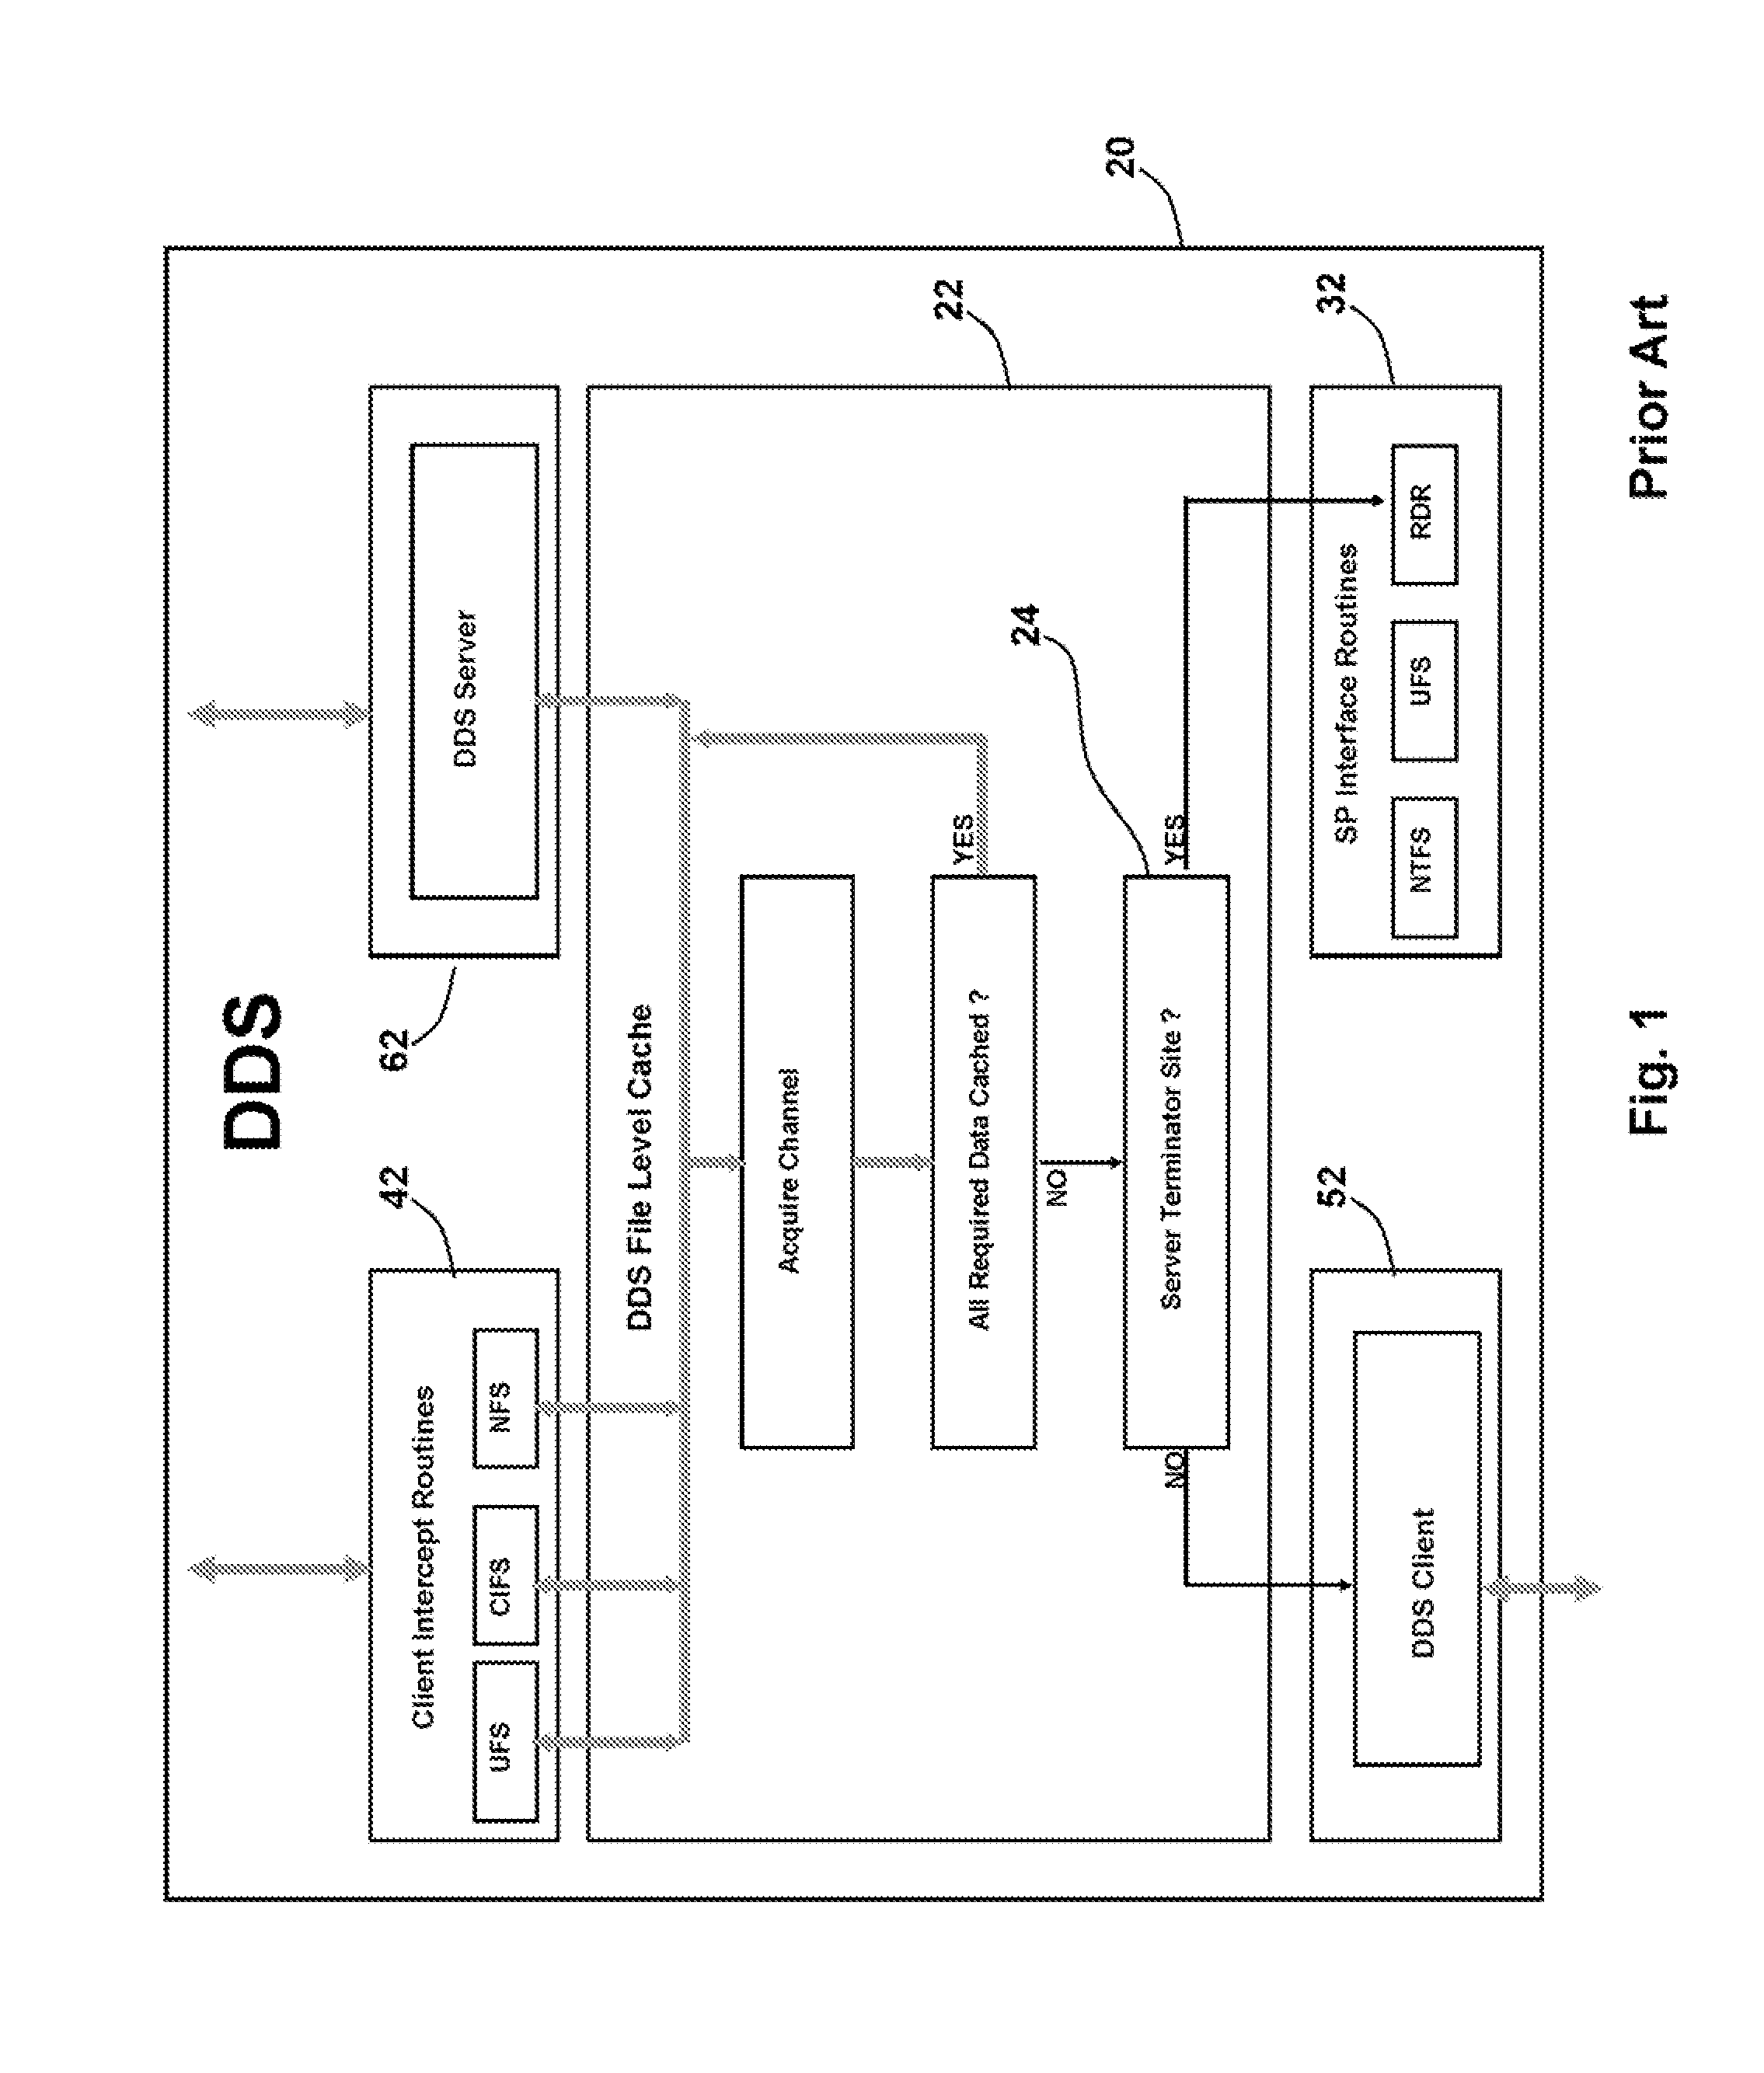 Distributed File System Consistency Mechanism Extension for Enabling Internet Video Broadcasting